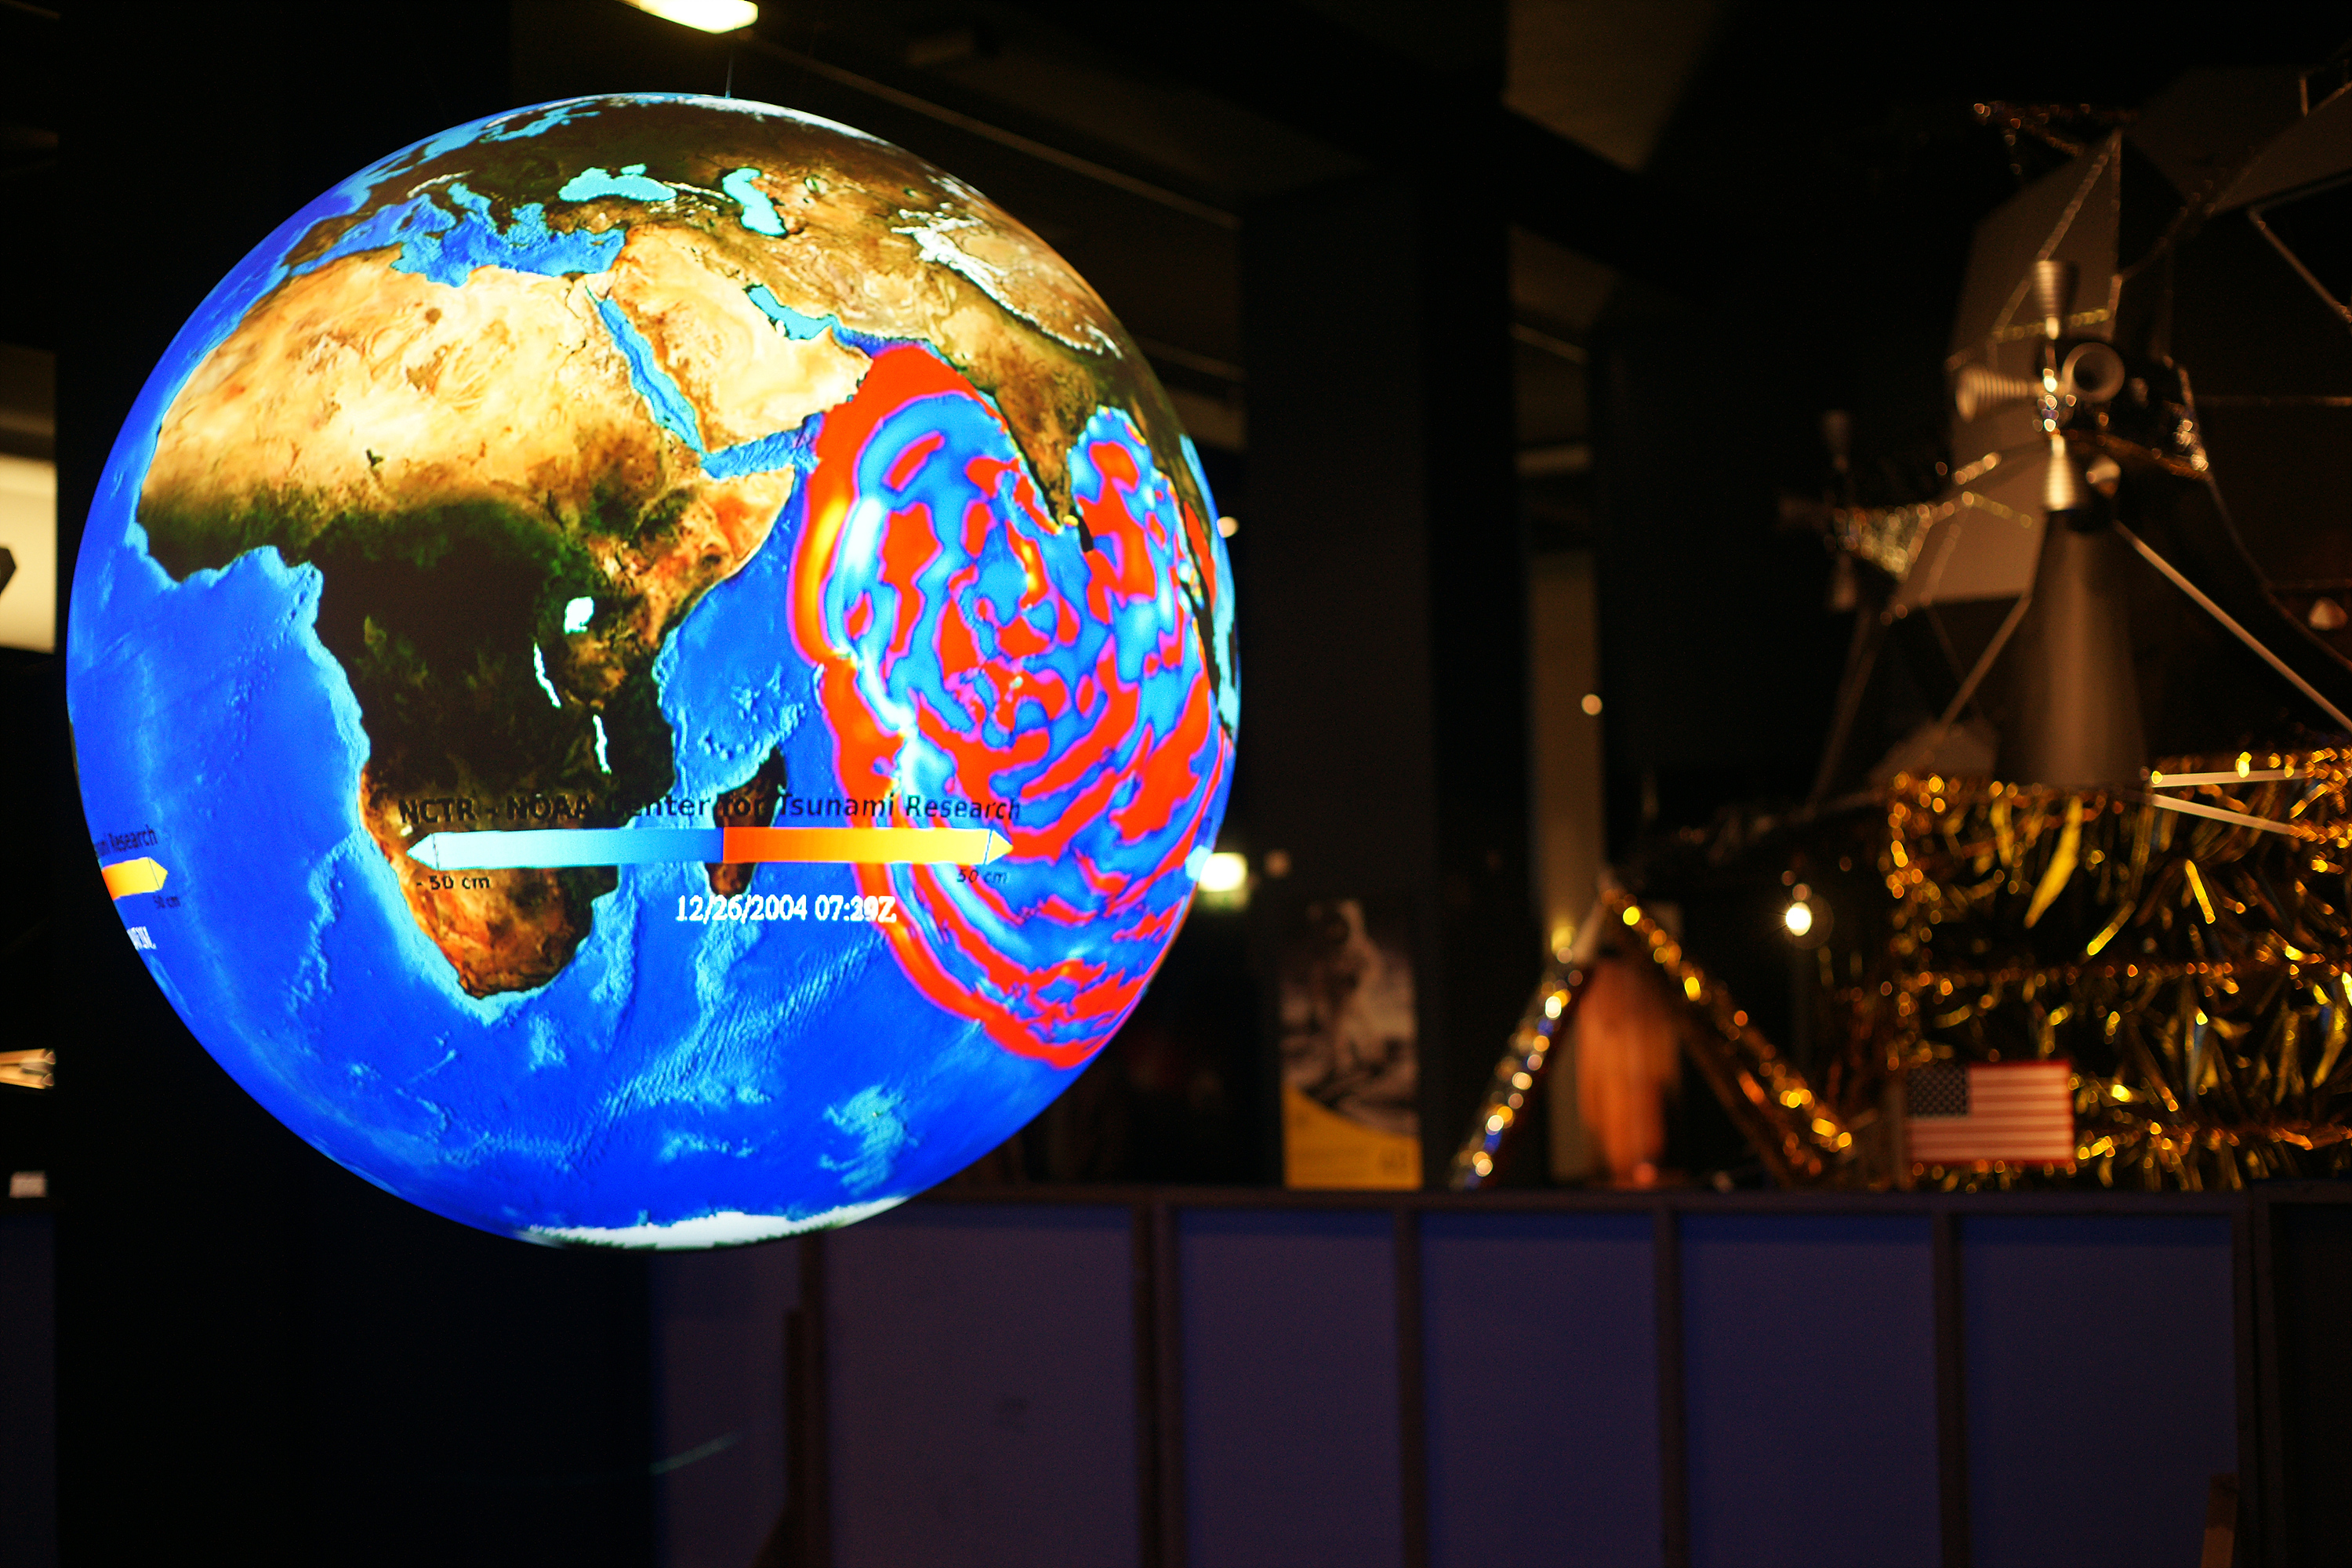 Science On a Sphere displays data from a tsunami in the Indian Ocean